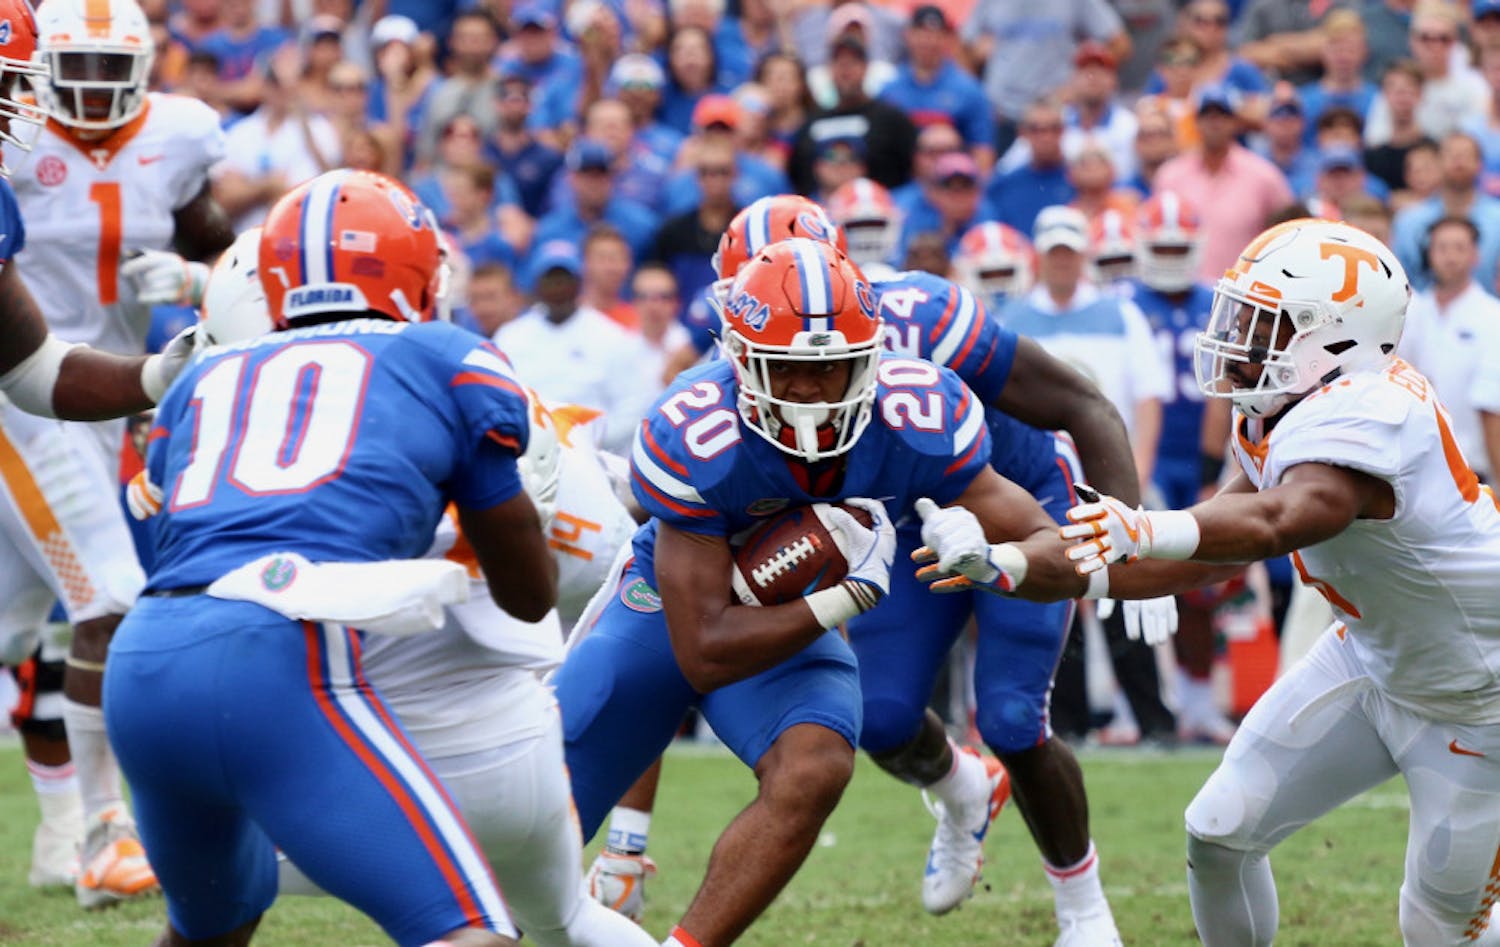 UF running back Malik Davis (20) runs with the ball during Florida's 26-20 win against Tennessee on Saturday at Ben Hill Griffin Stadium.